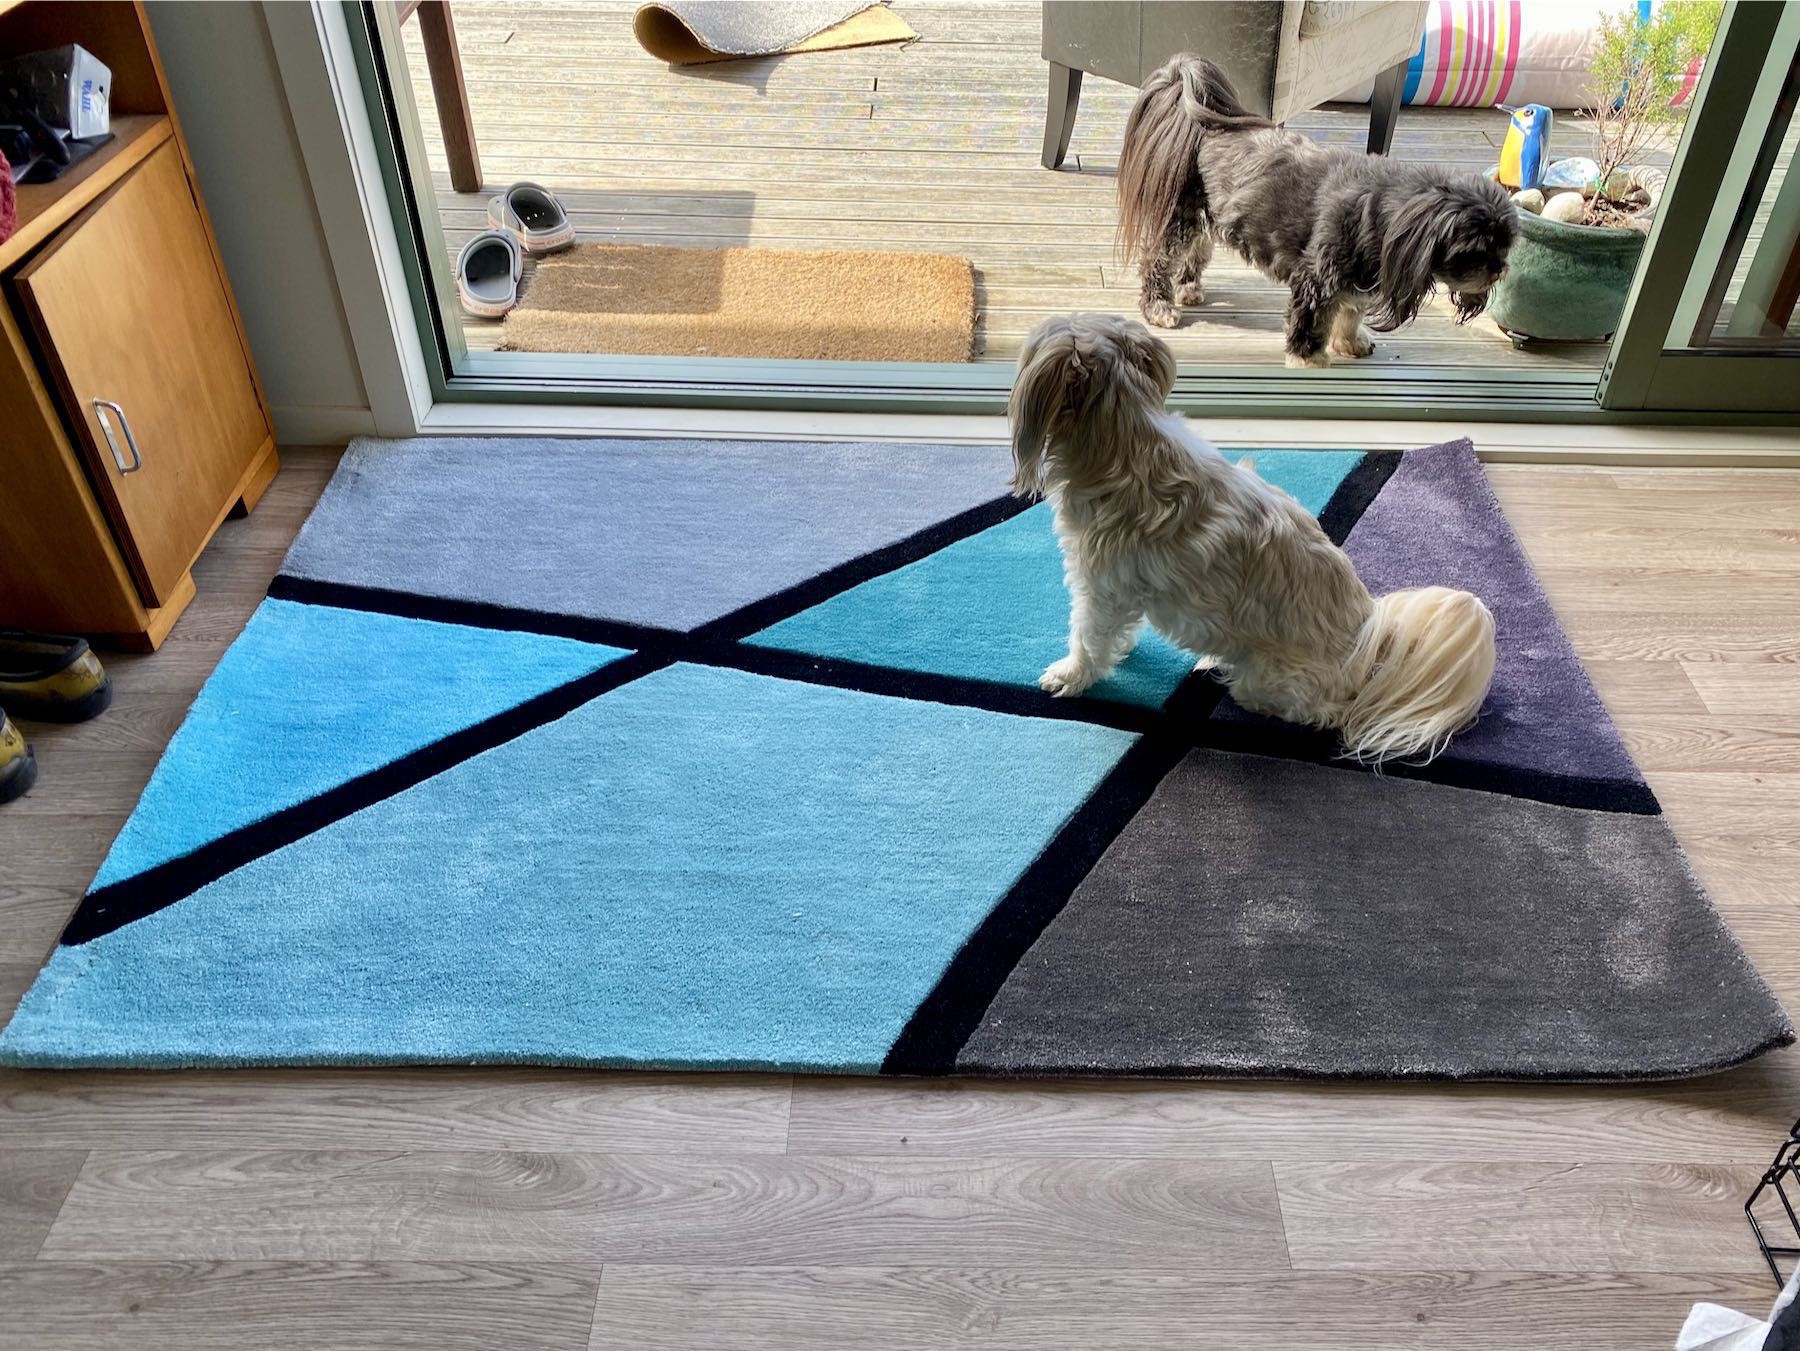 Small pale dog on a multicoloured rug. 